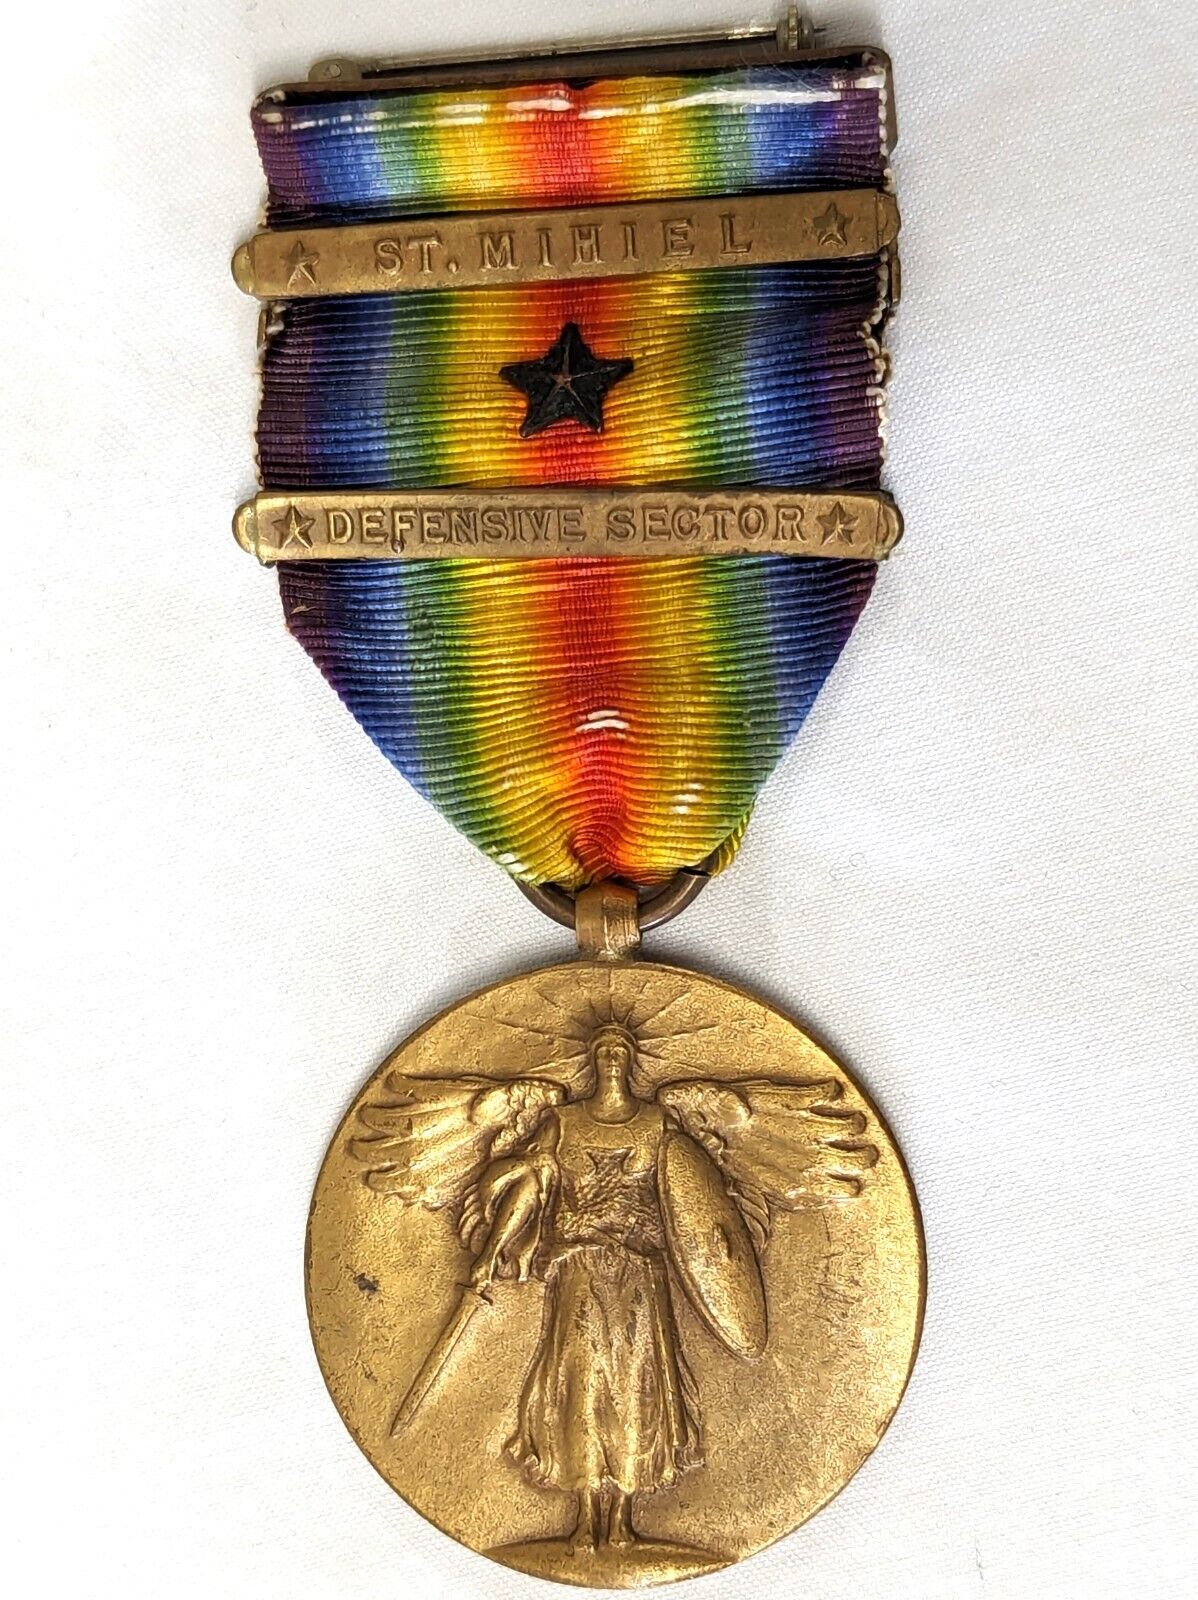 Scarce WW1 US Victory Medal with Star Gallantry device